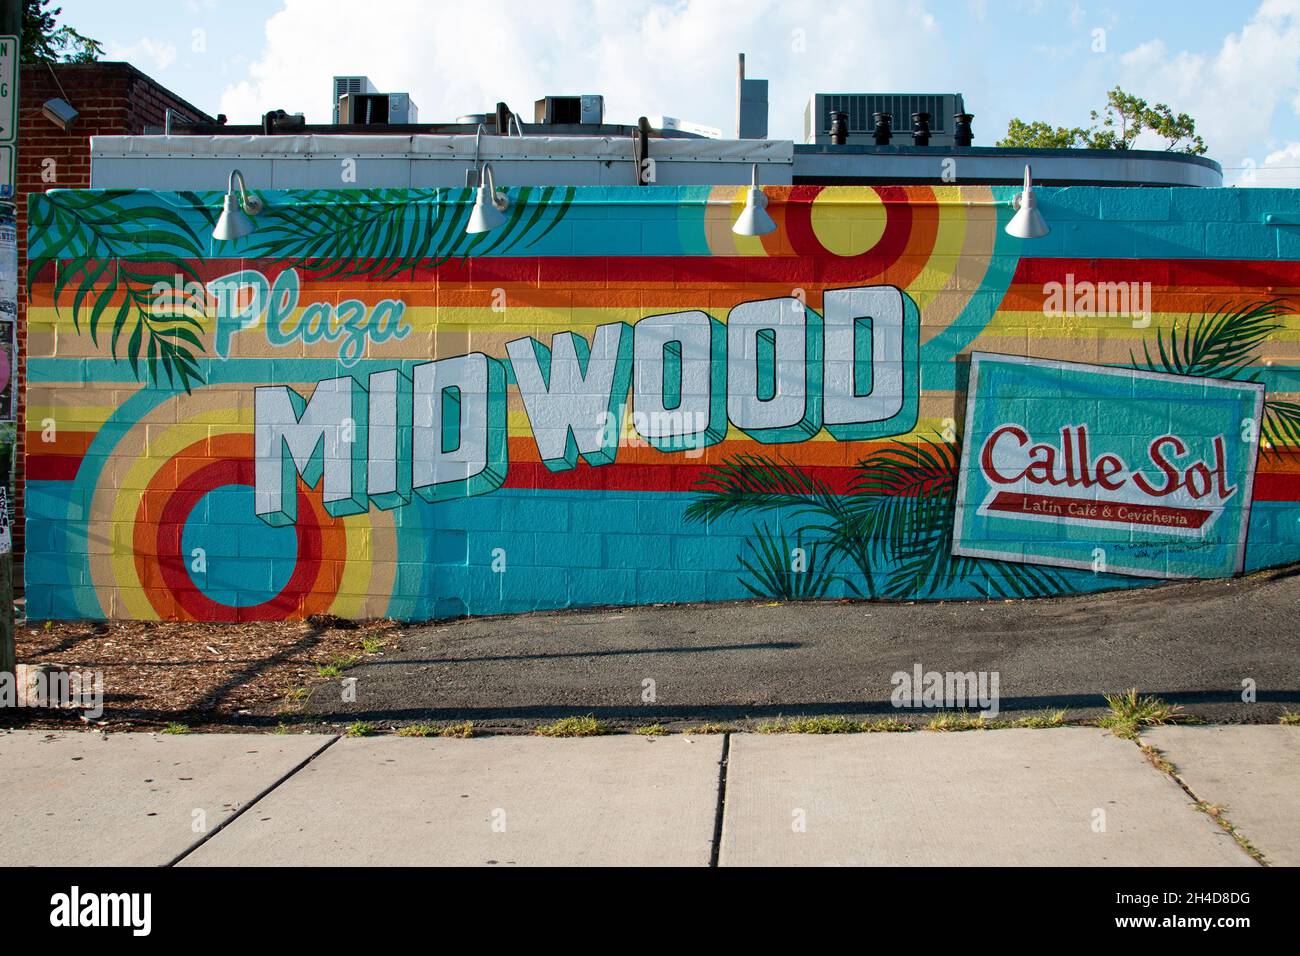 Calle Sol in Plaza-Midwood, Charlotte NC Stock Photo